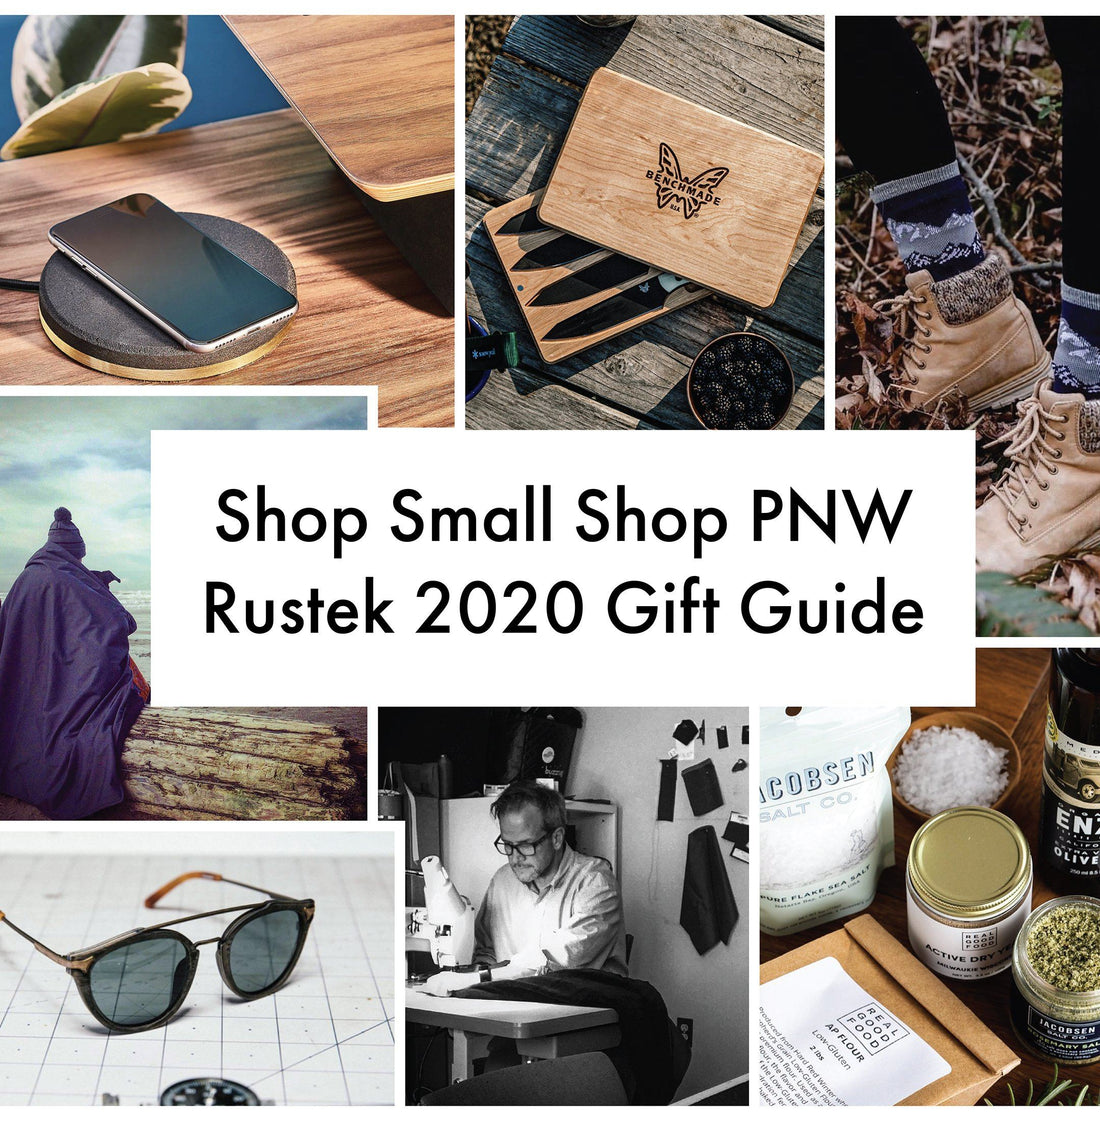 Shop Small, Shop PNW:  The Rustek 2020 Holiday Gift Guide